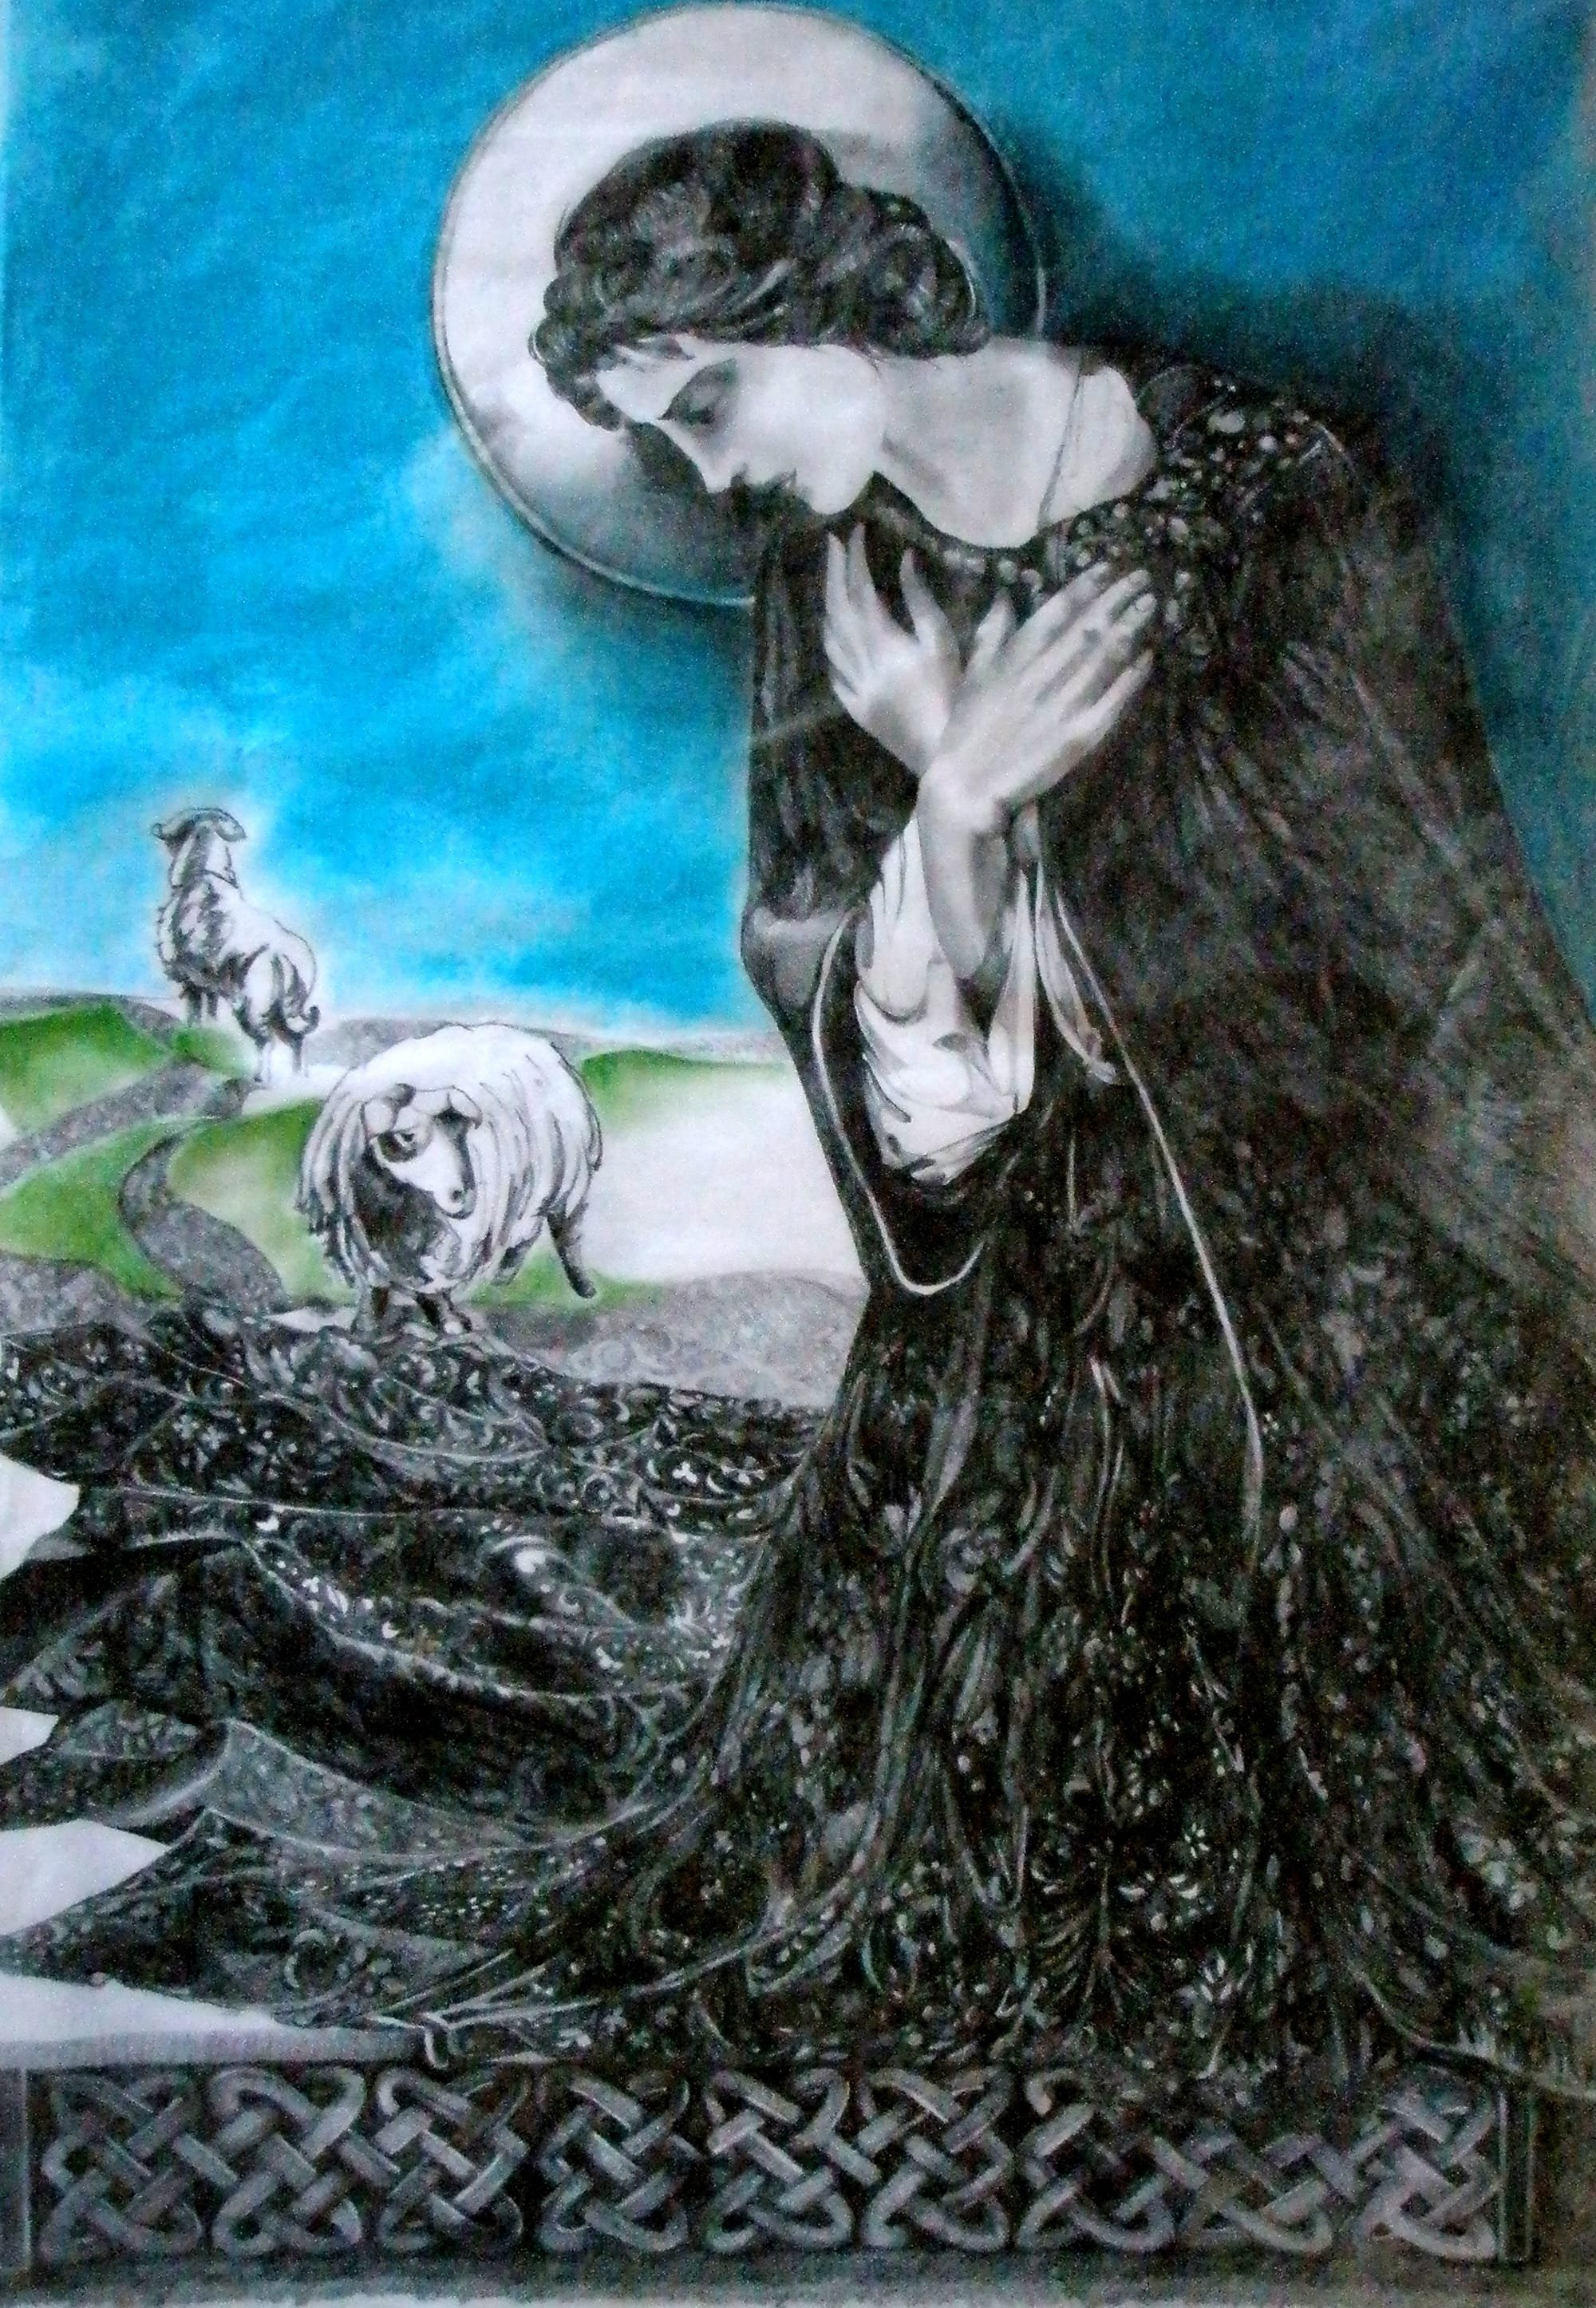 Saint Brigid, after a painting by John Lavery, pencil and pastel on tissue paper, 50 x 70cms